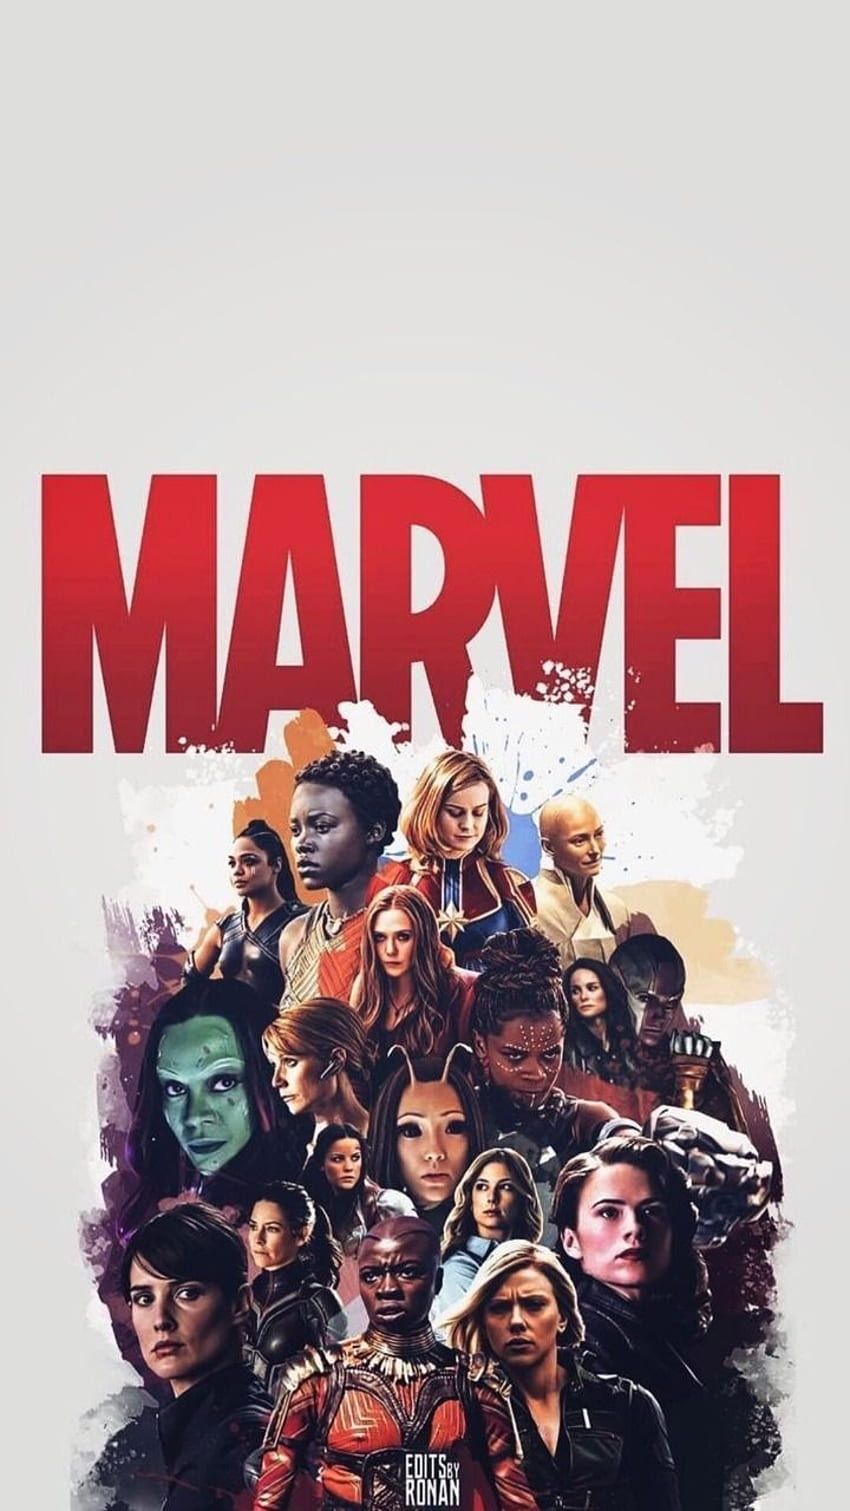 A poster of the Marvel Universe with all the strong women characters of the Marvel Universe on it. - Avengers, Marvel